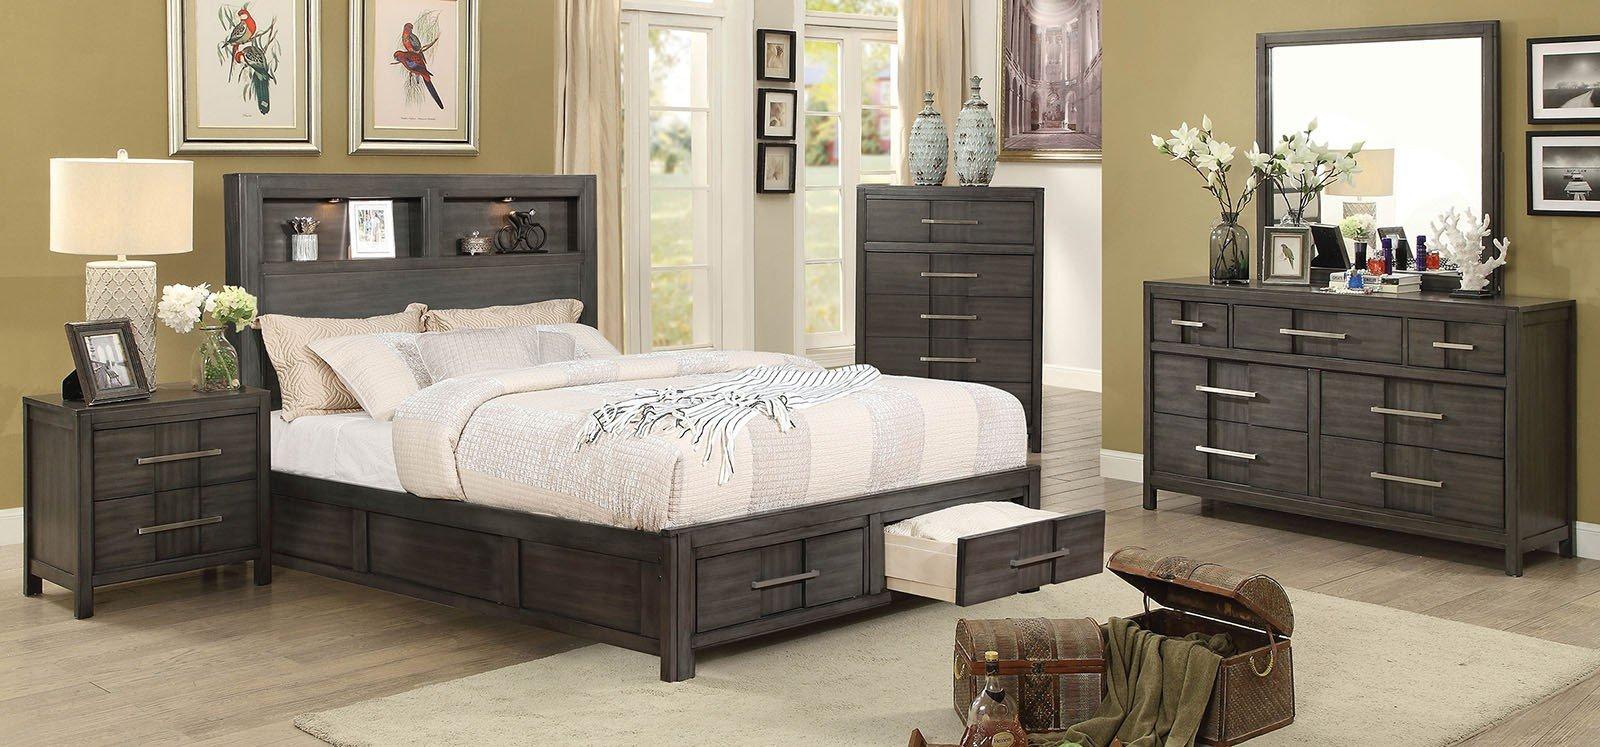 Transitional Storage Bedroom Set KARLA CM7500GY CM7500GY-Q-5PC-CHE in Gray Matte